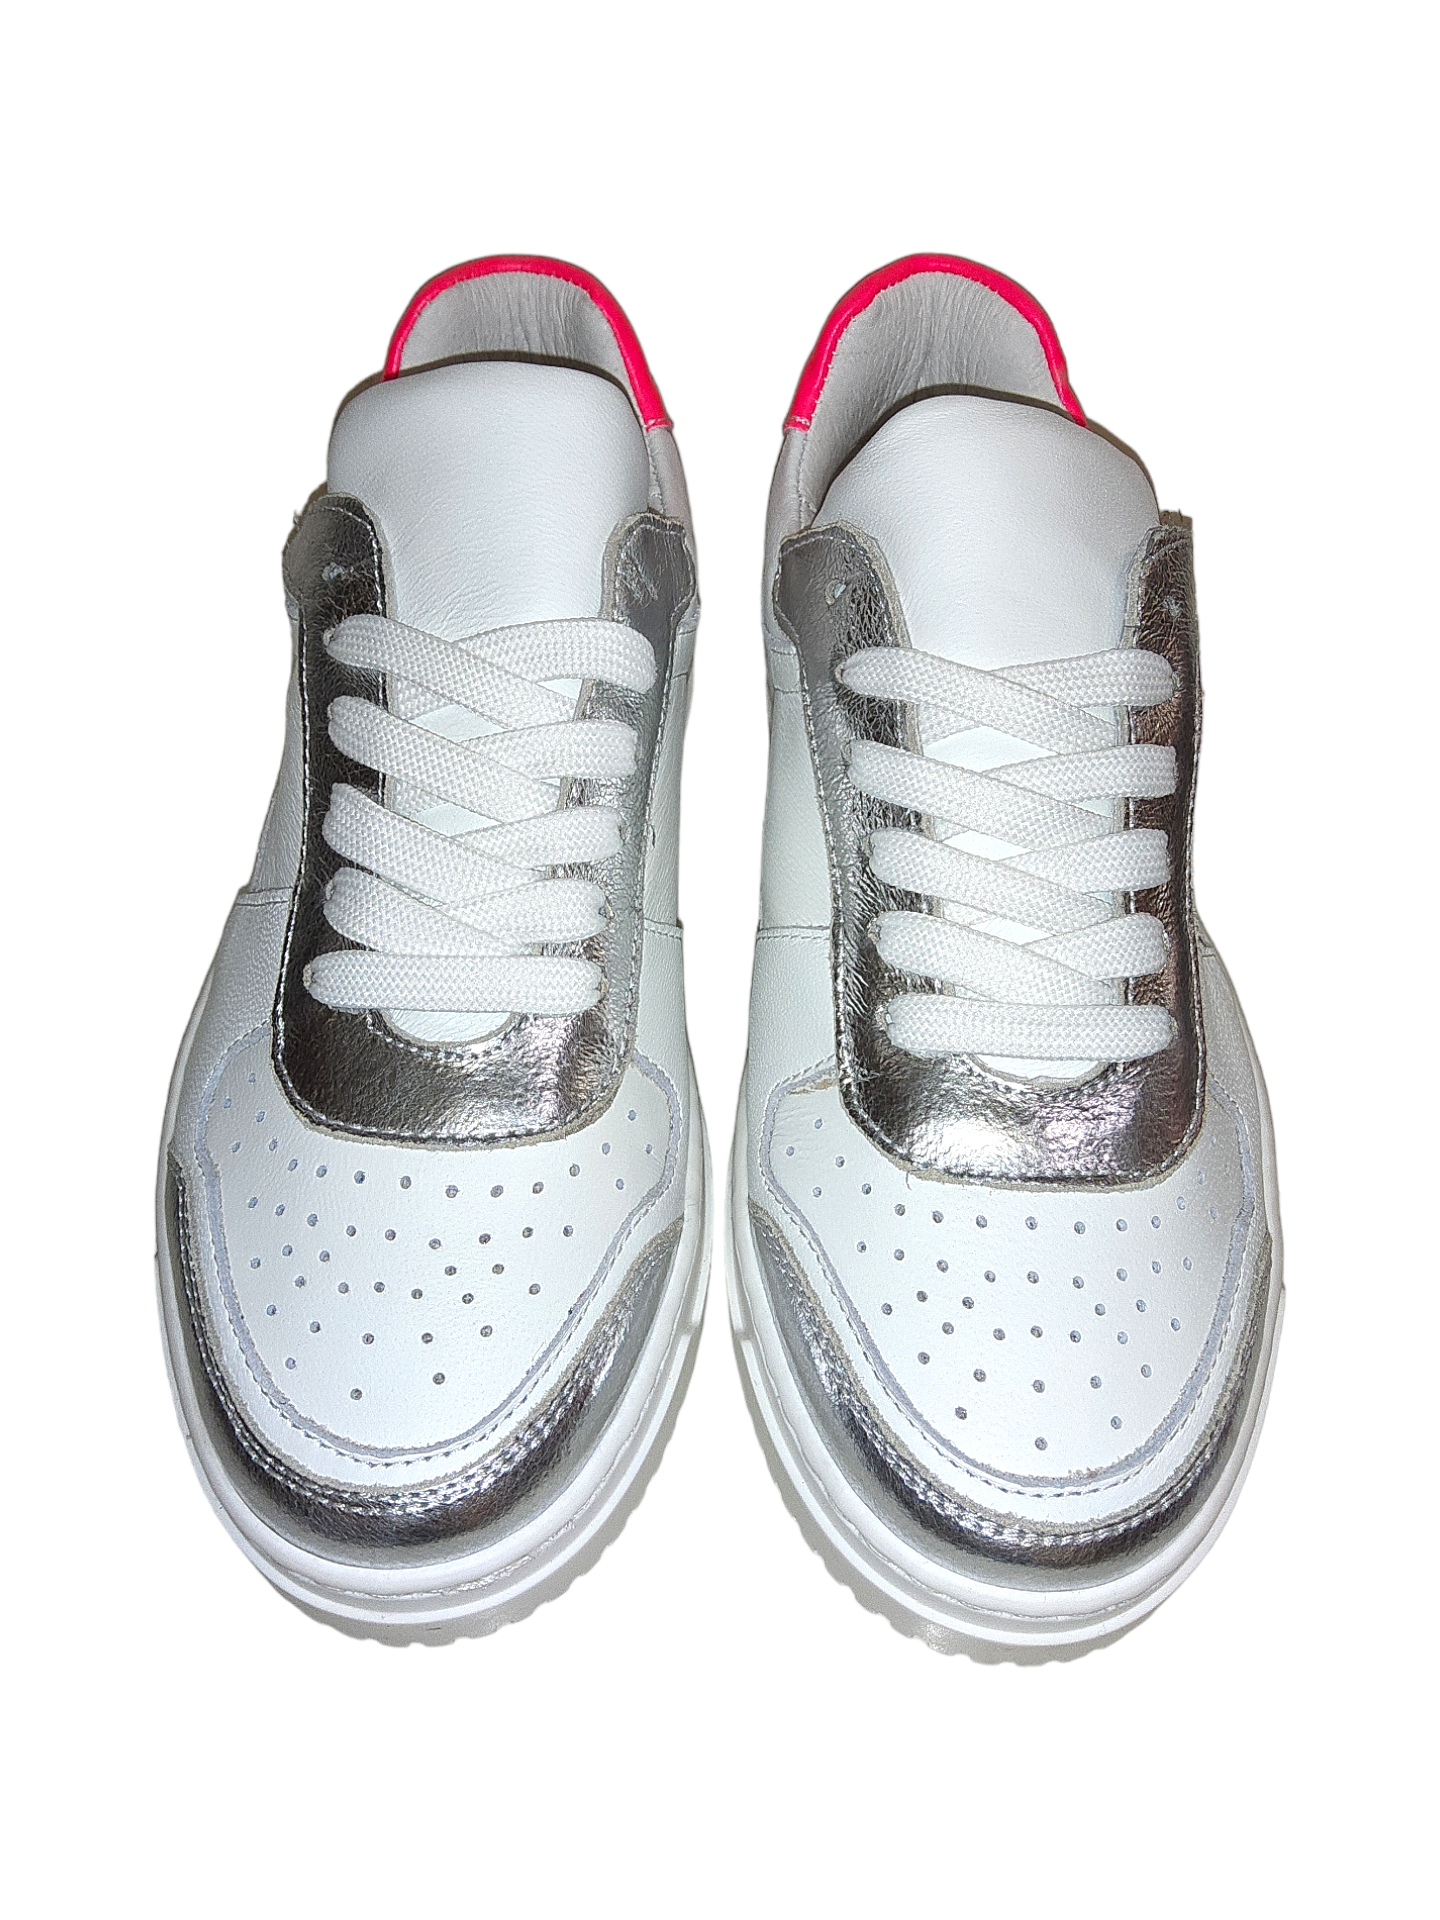 White and silver leather sneakers